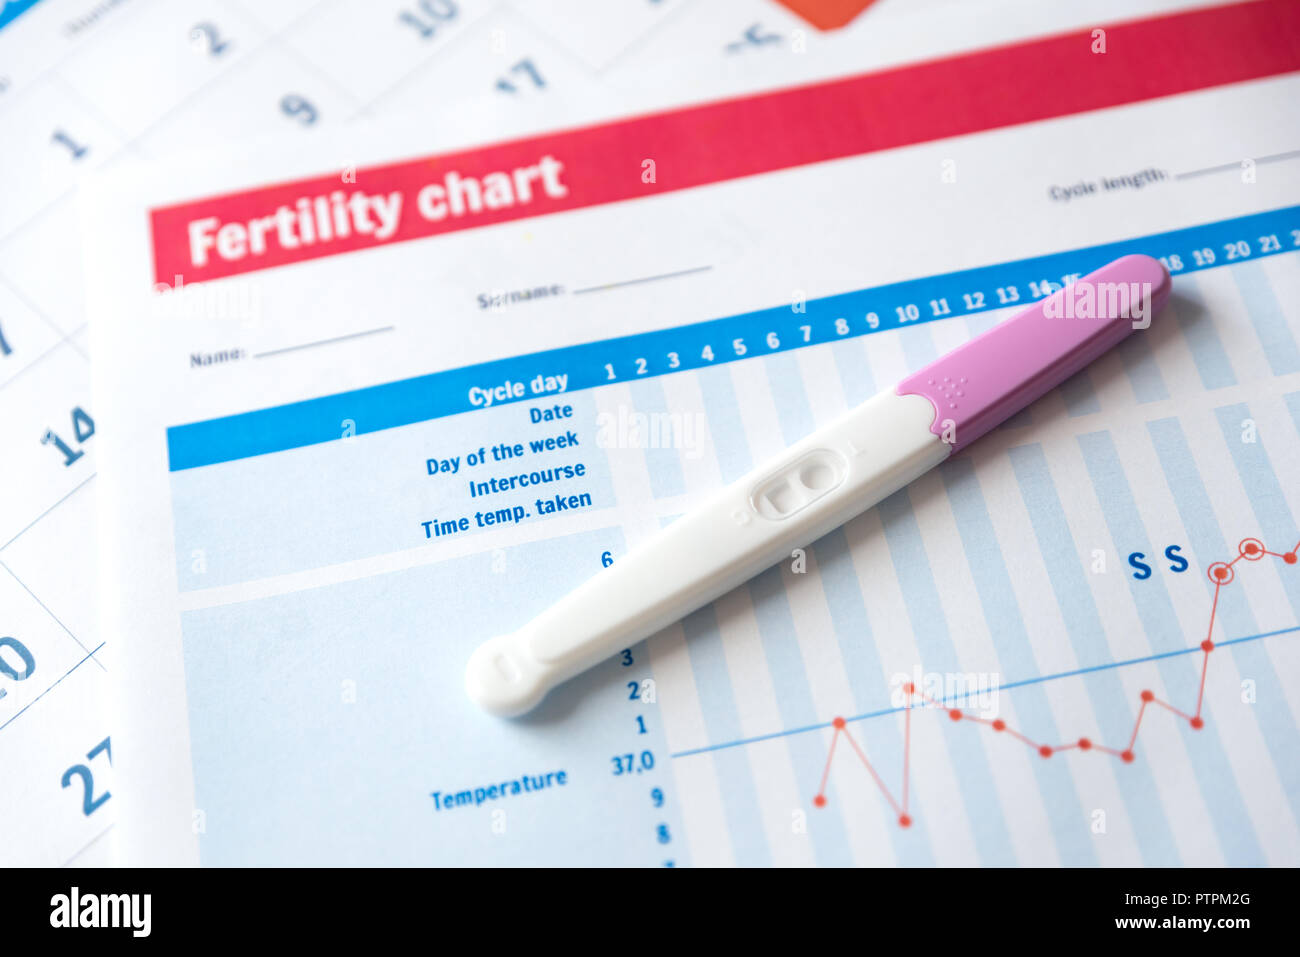 Pregnancy test on fertility chart. Expect a baby concept. Stock Photo